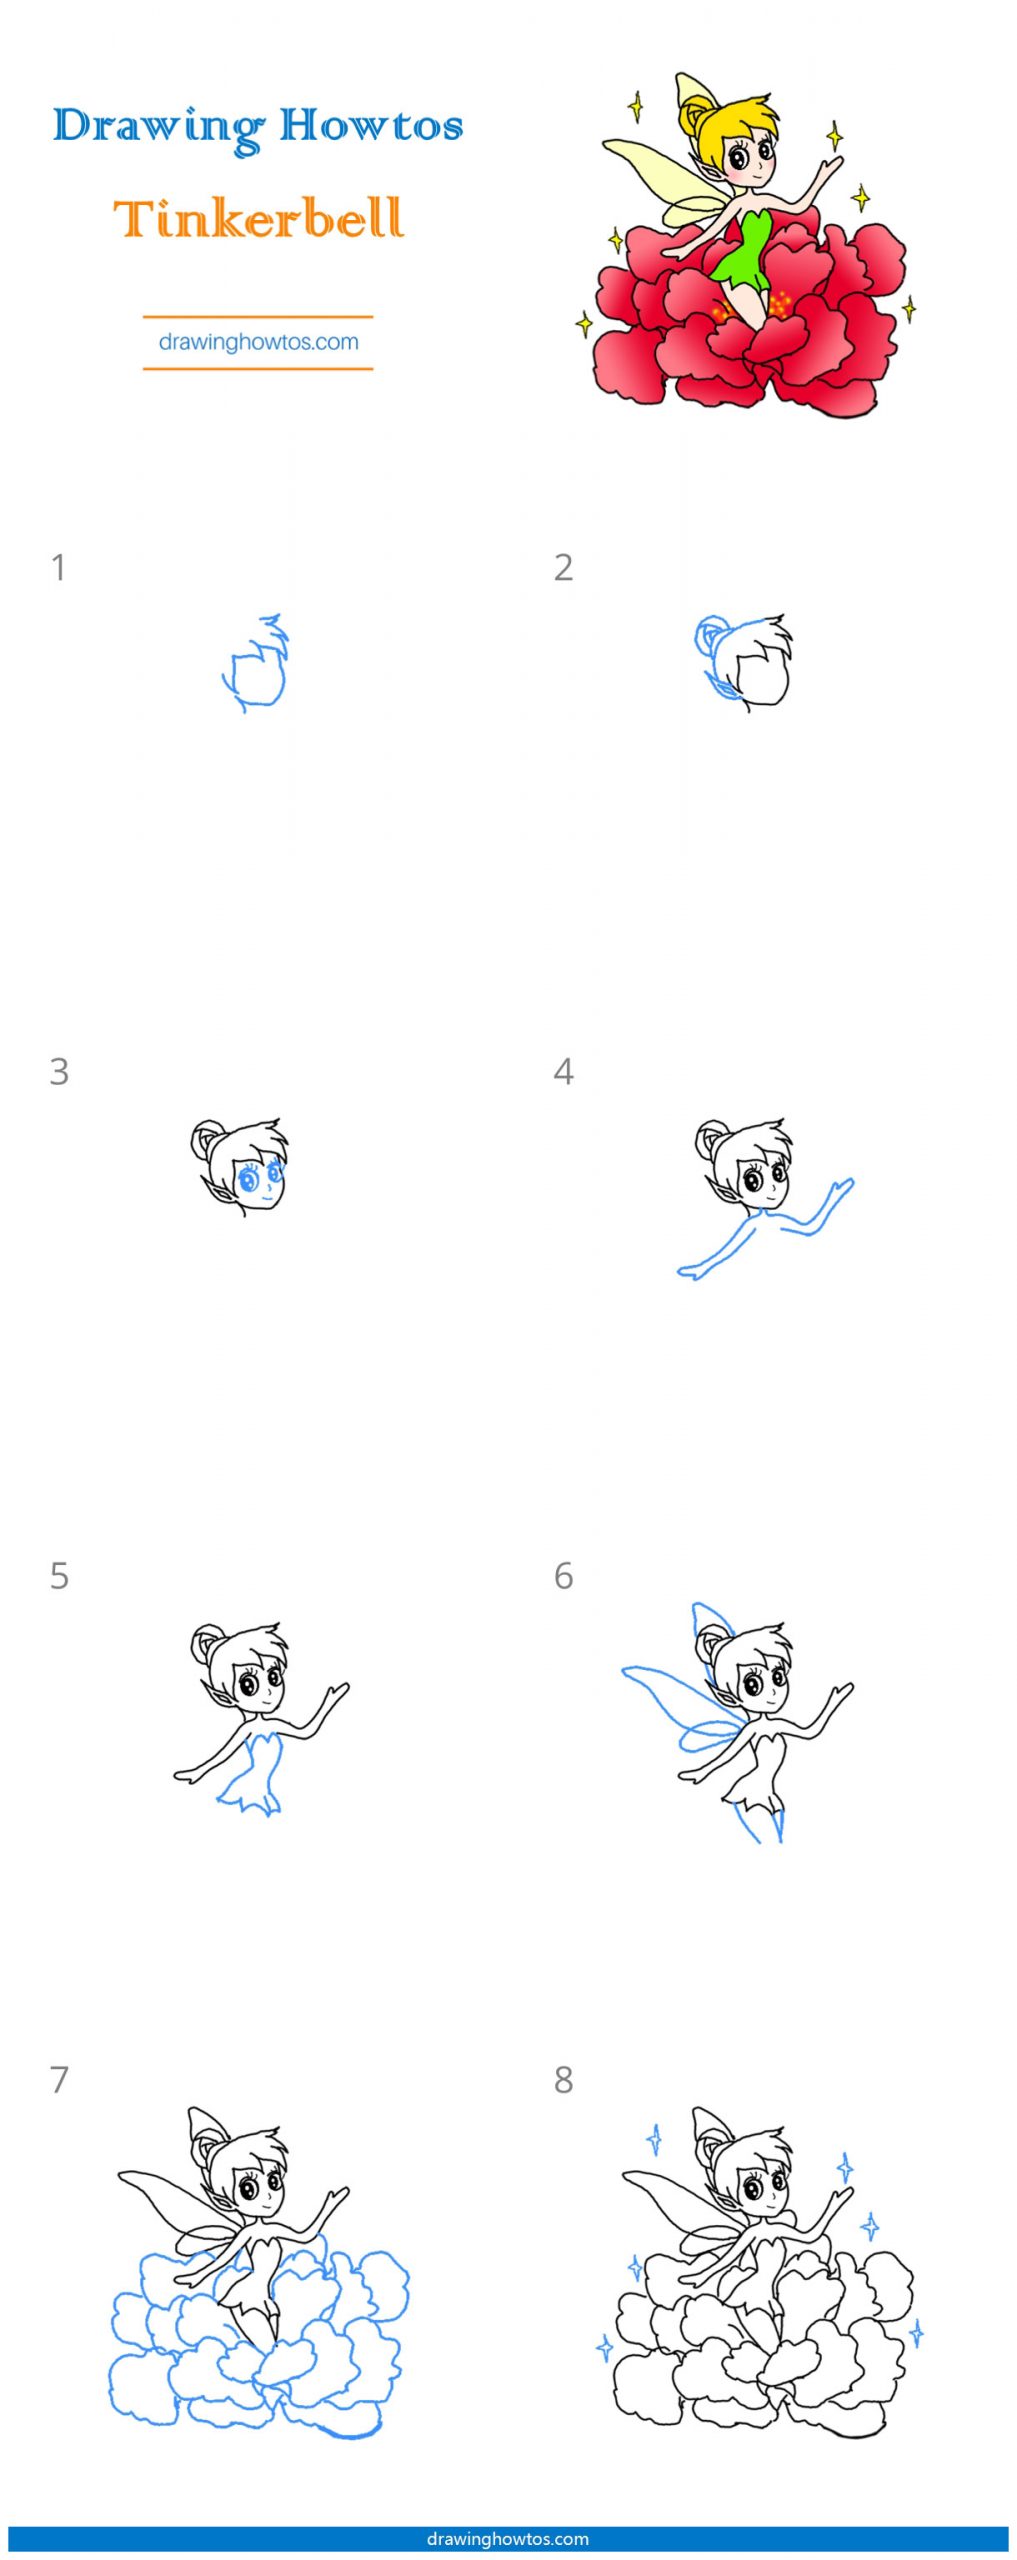 How to Draw a Tinkerbell - Step by Step Easy Drawing Guides - Drawing